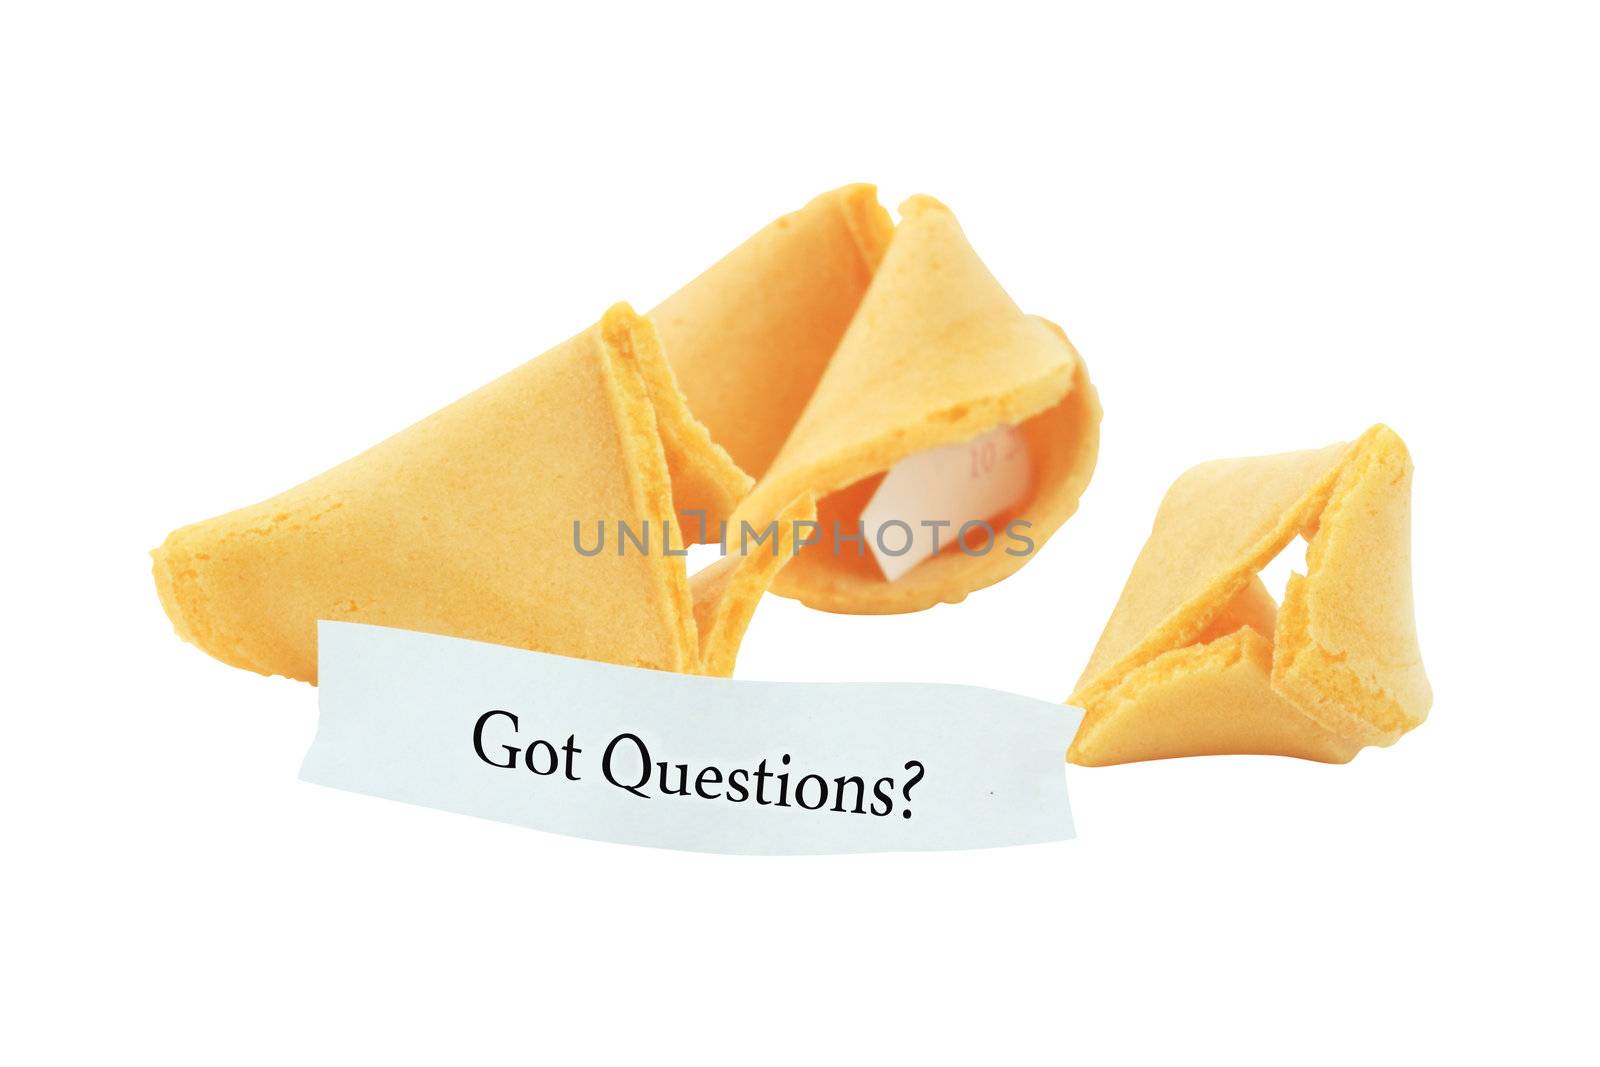 Broken fortune cookies isolated on white with message "Got Questions?" Clipping path included. Text easily removed.